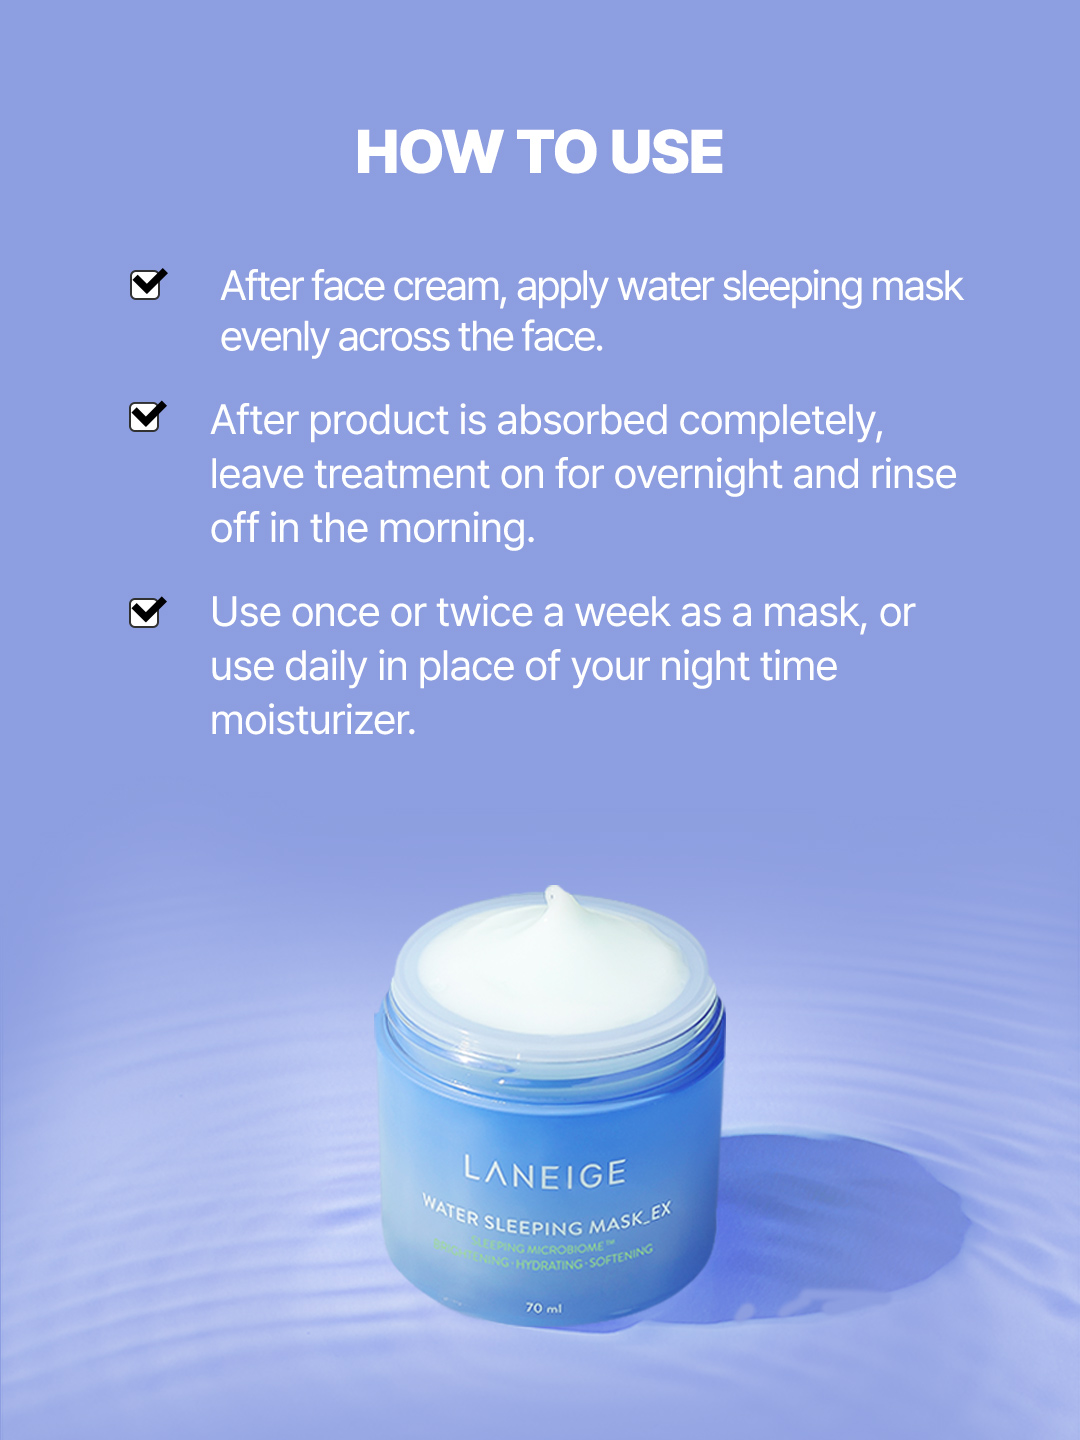 LANEIGE Water Sleeping Mask page four.